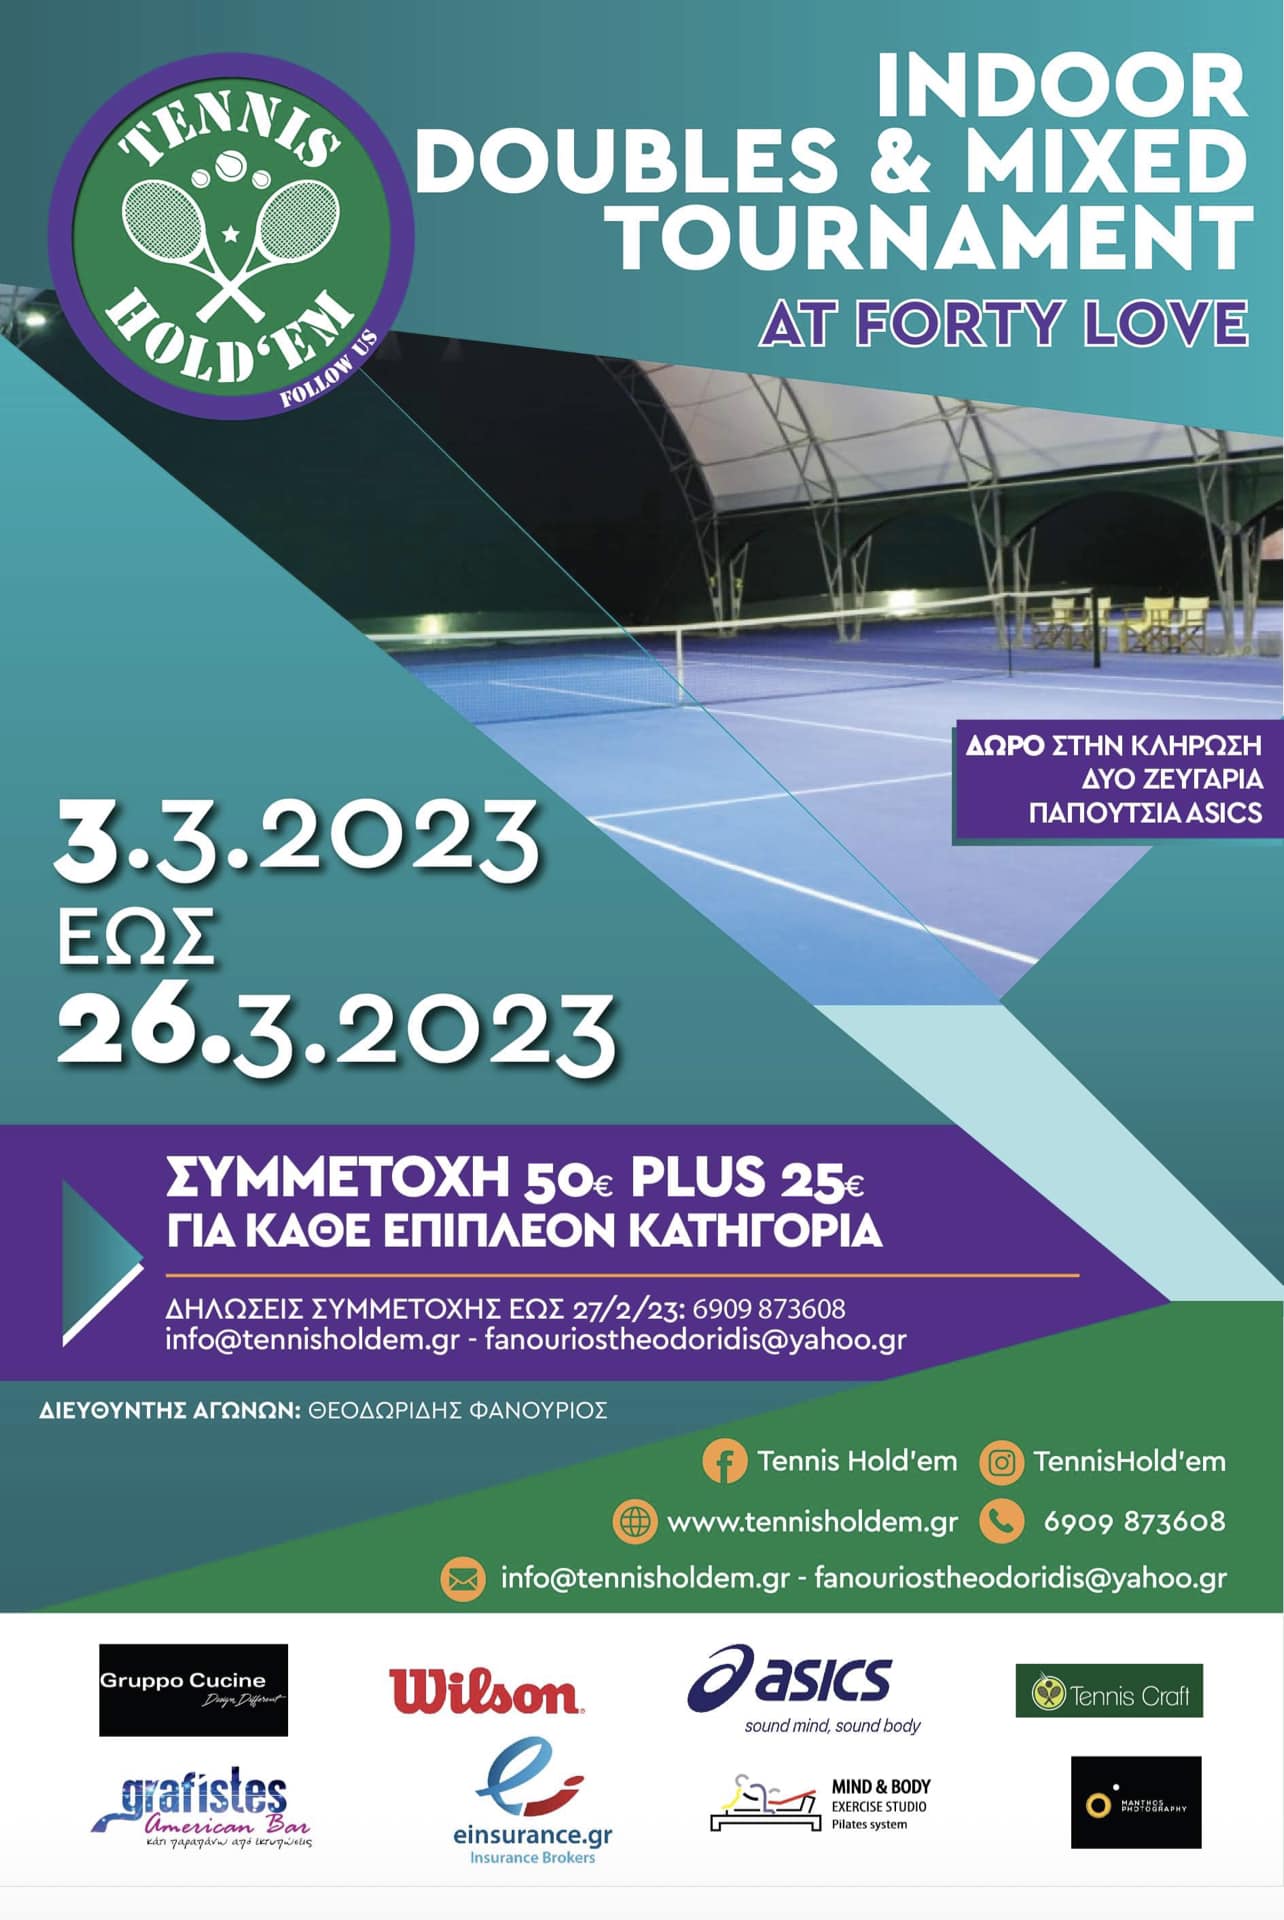 INDOOR DOUBLES & MIXED TOURNAMENT AT FORTY LOVE - (3/3 - 26/3)